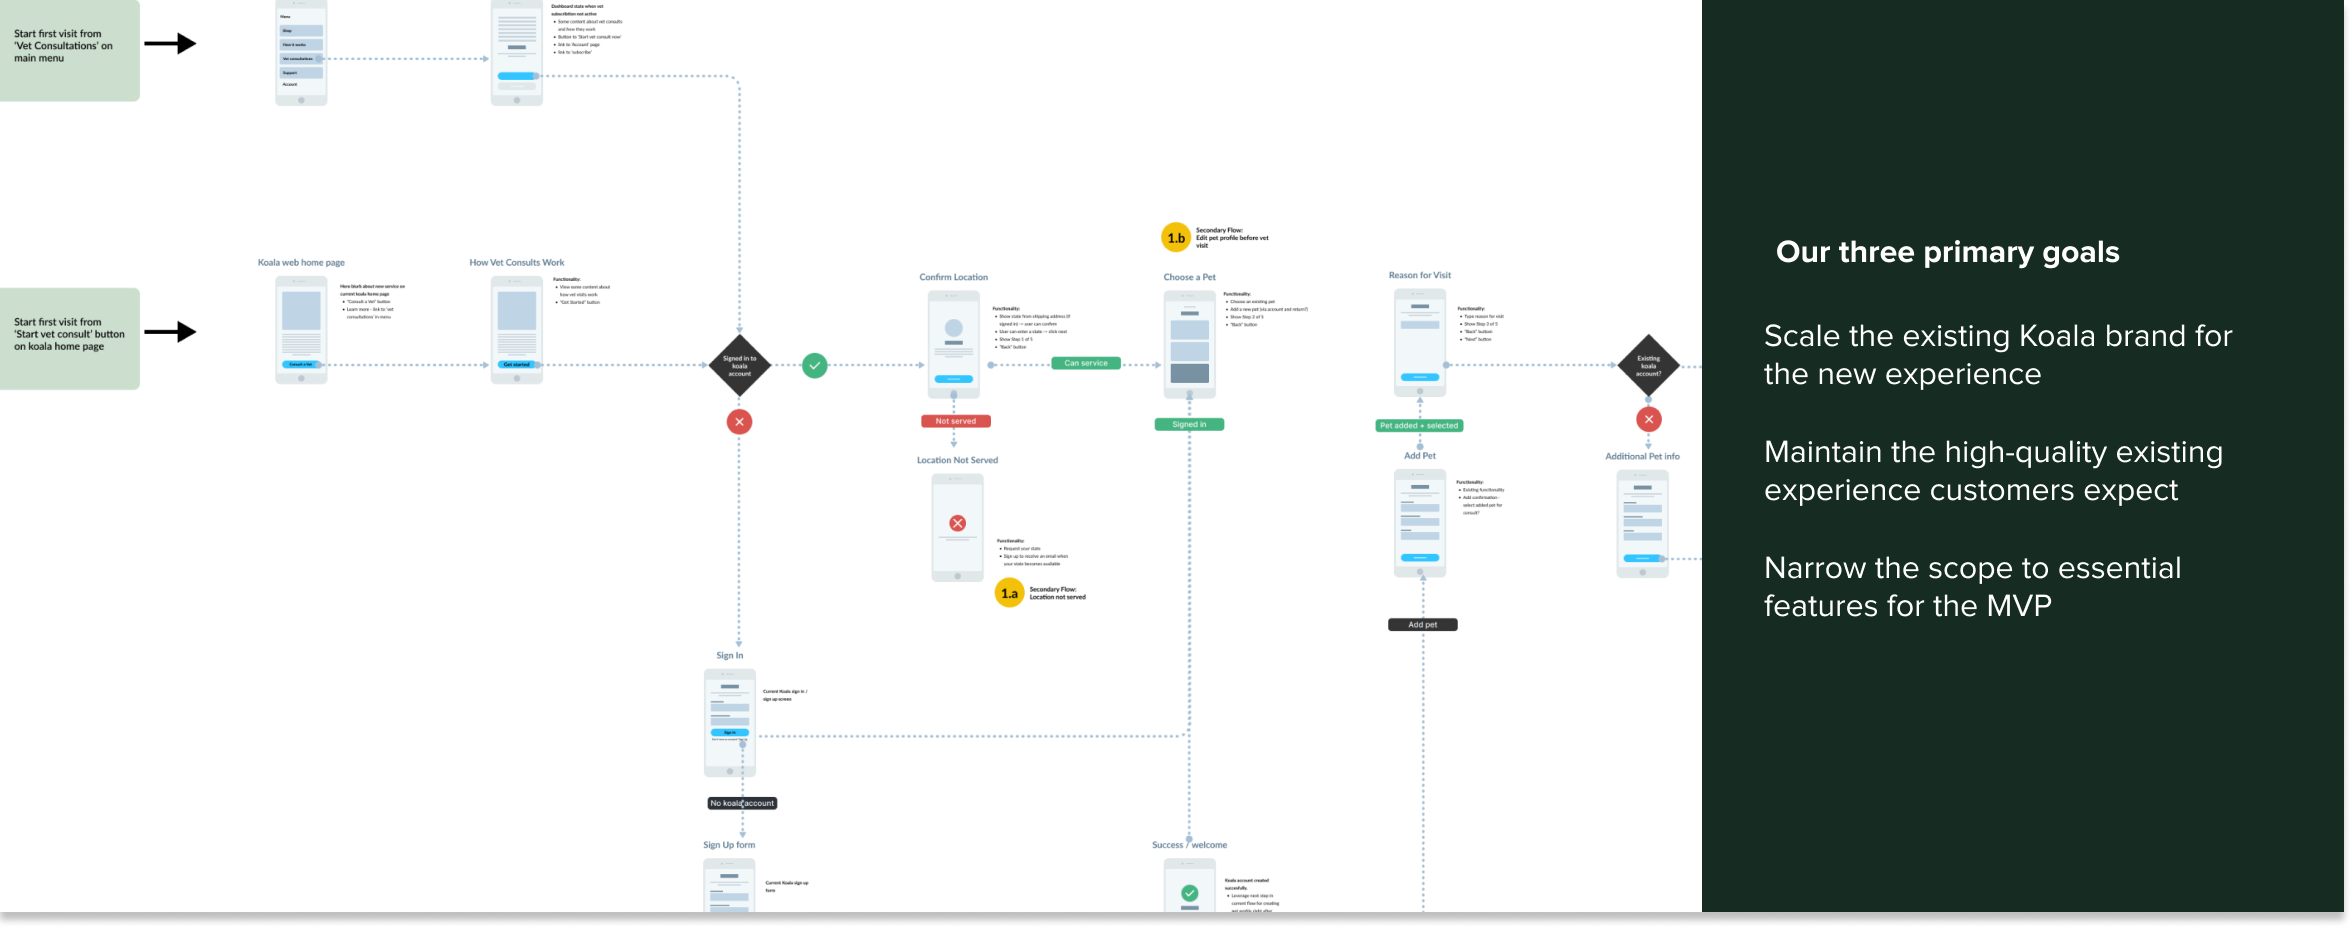 User flows diagram created by Echobind for Koala Health, describing the primary goals of the project